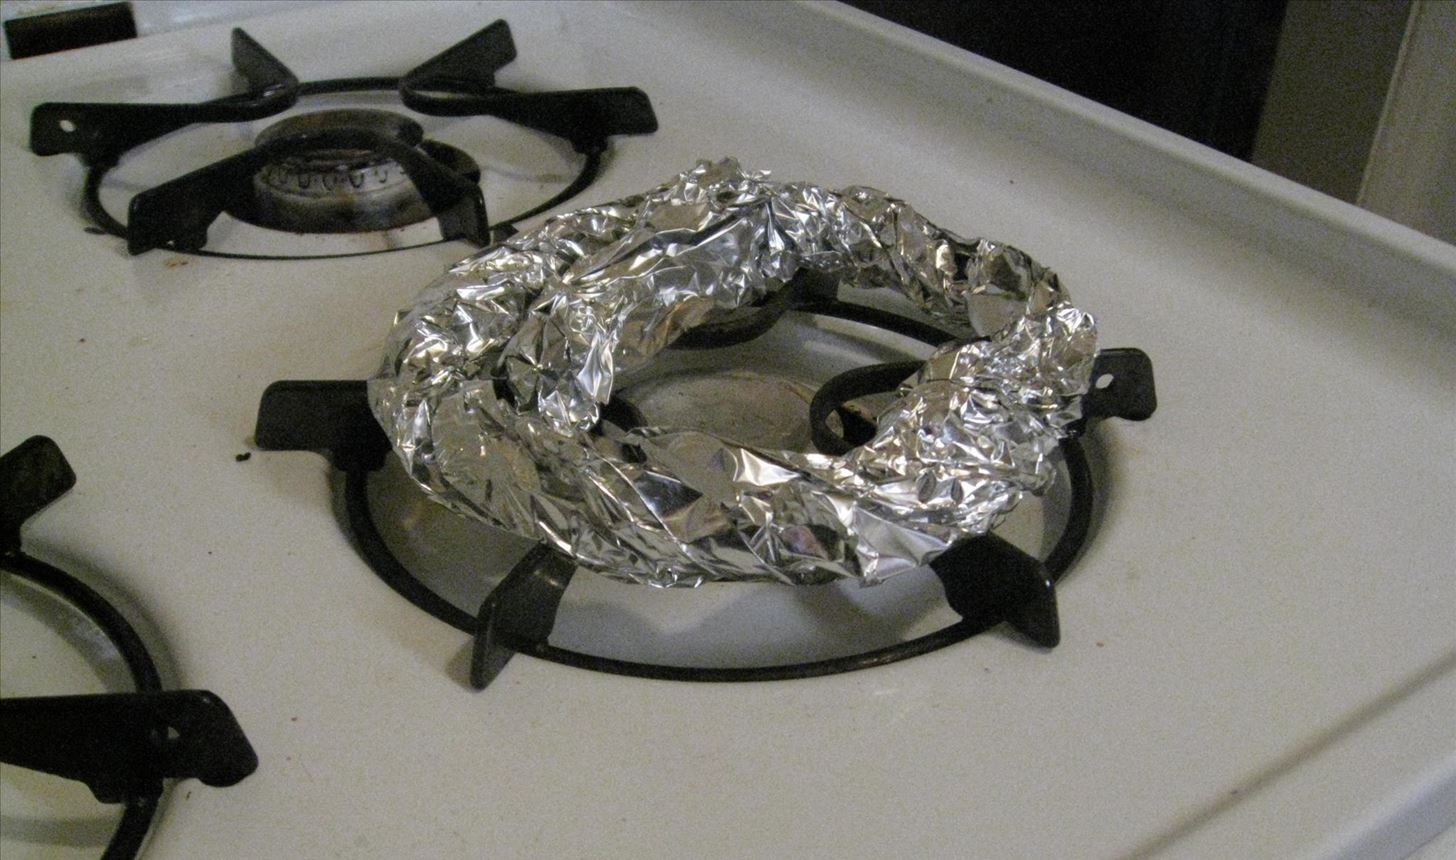 12 Brilliant Kitchen Hacks Made Possible with Aluminum Foil